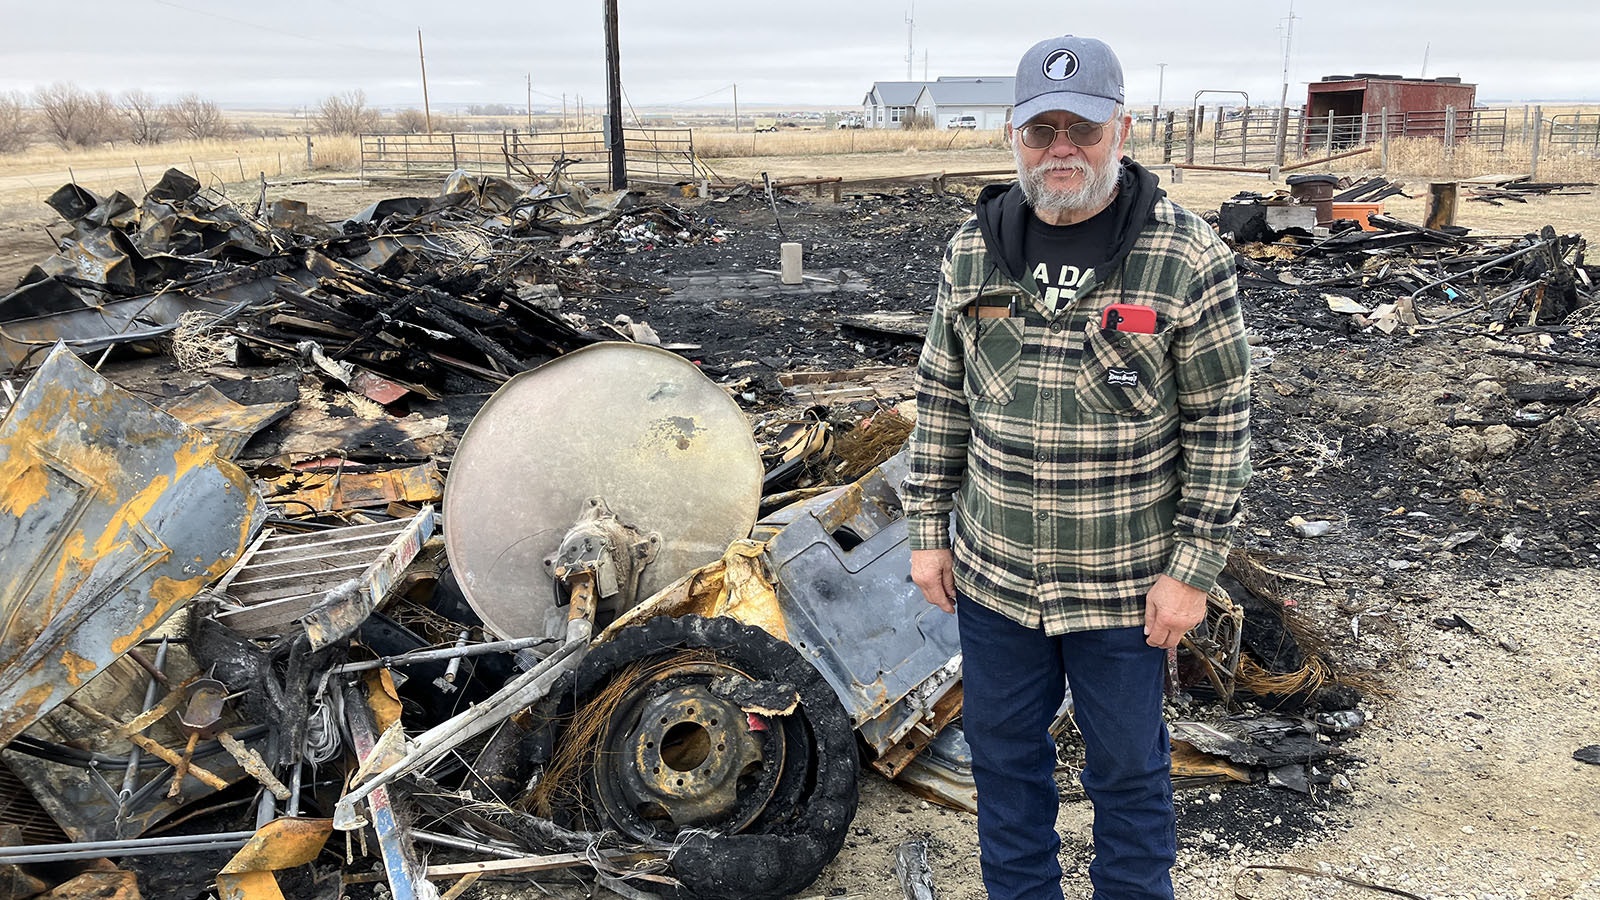 Phil Pulanco continues to contemplate next steps following a fire that claimed all his and his wife’s possessions on March 9. The Vietnam veteran’s Purple Heart was among the family treasures that were destroyed.